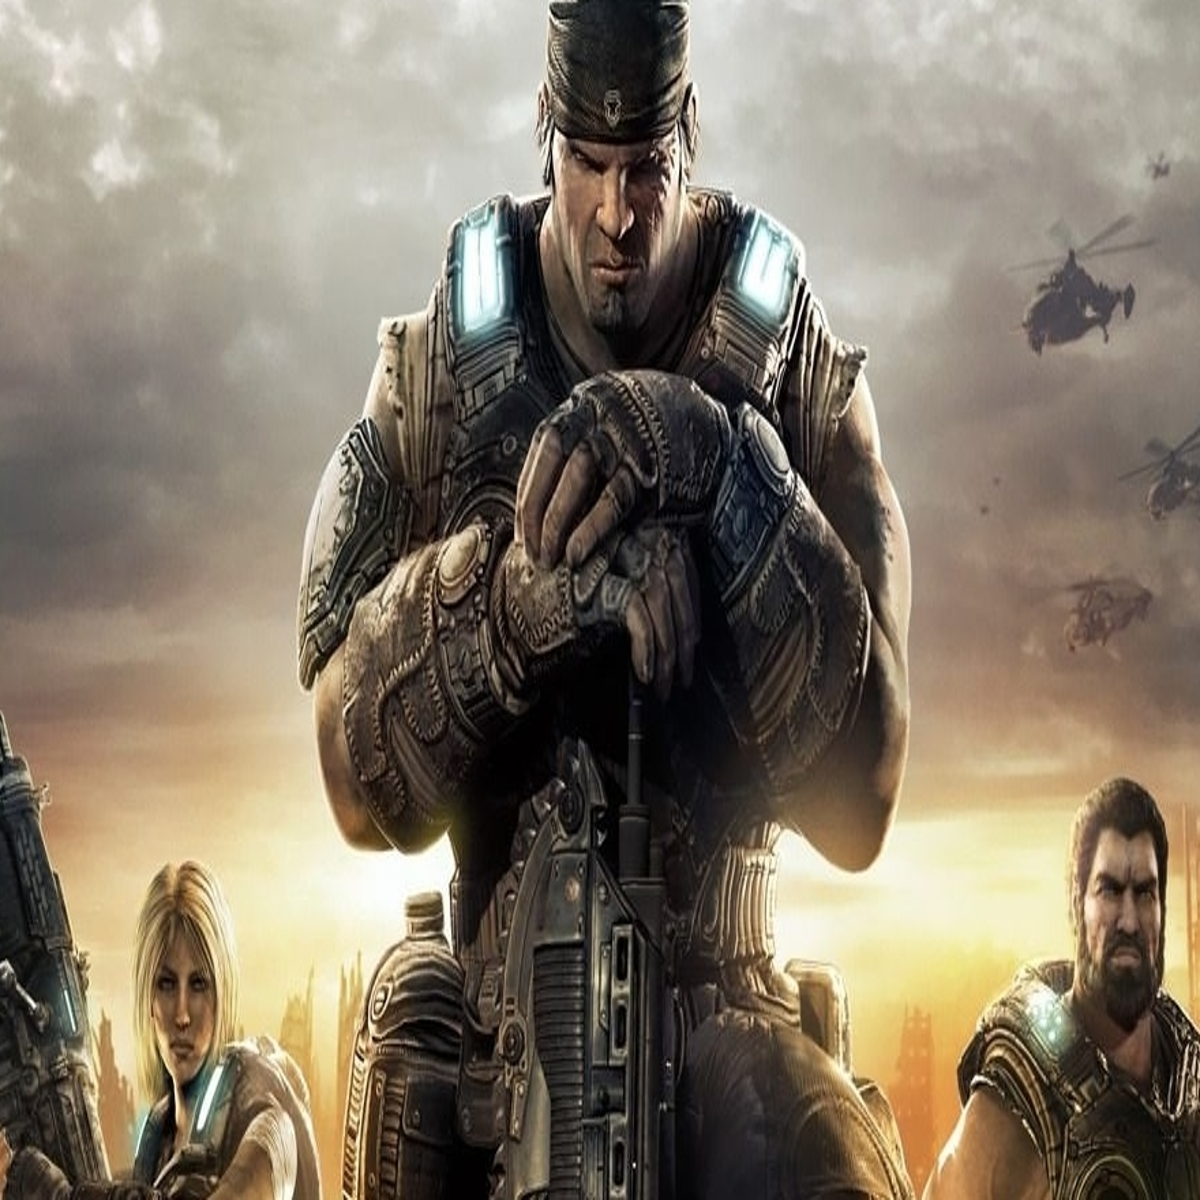 4 Games Like Gears of War on PS4